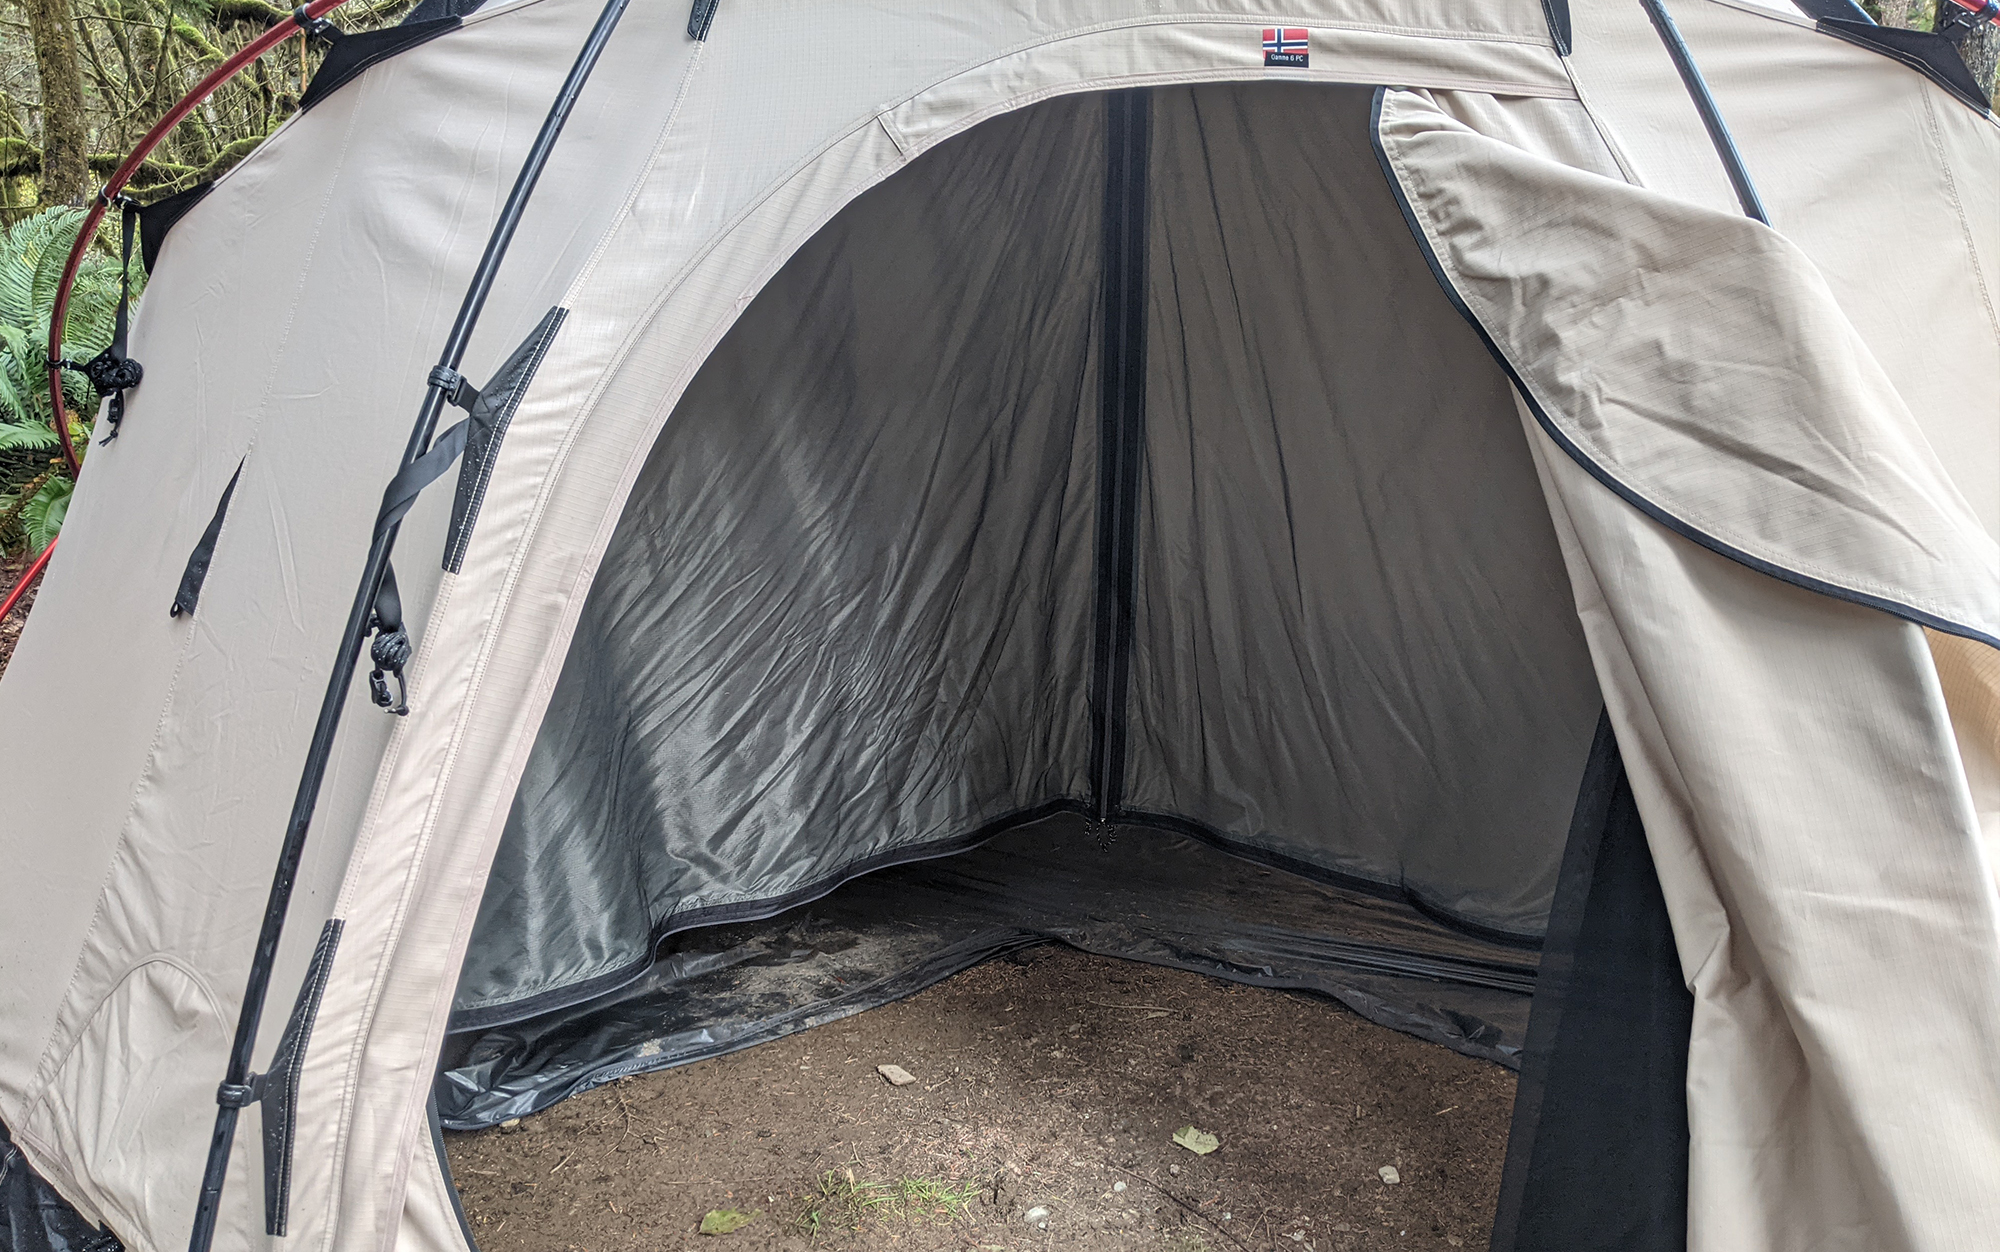 The inner tent, which clips onto the inside of the main canvas tent, provides some separation between the stove and your sleeping area, but does break up the space in ways that might not be ideal. 